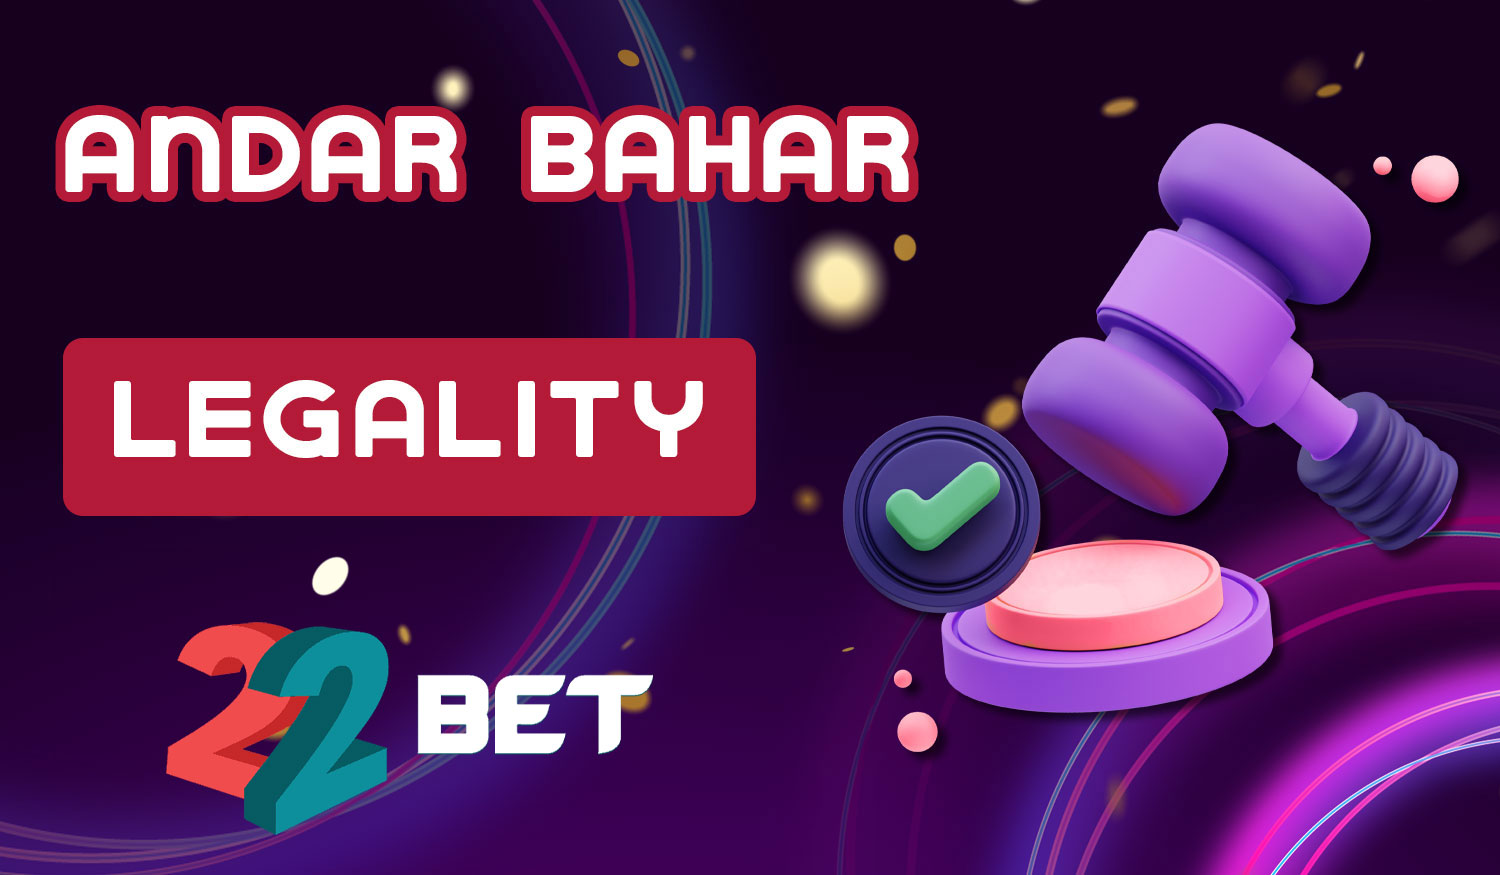 The 22Bet platform is fully legal in the territory of India